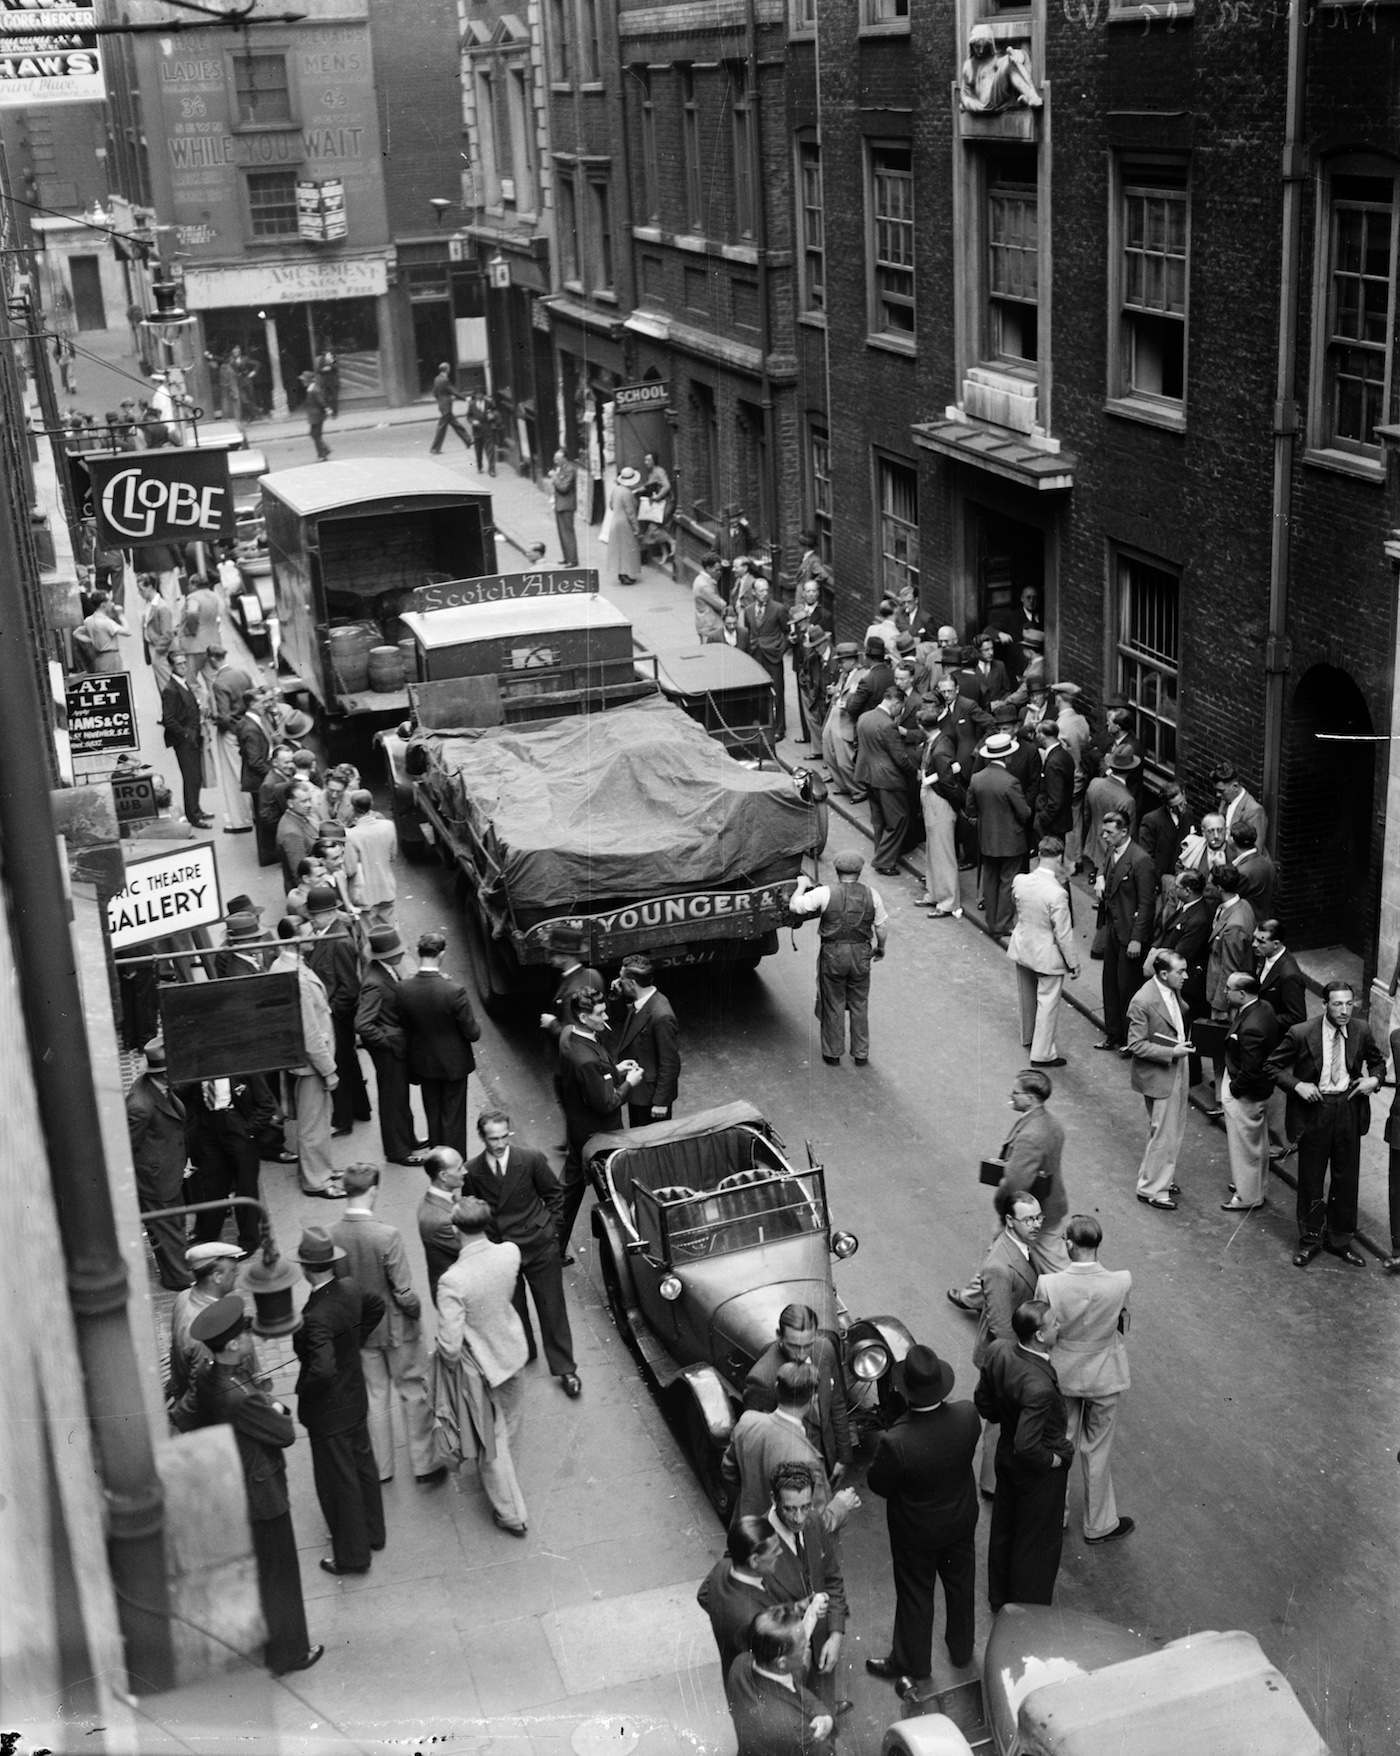 1935:  In Archer St, Soho, London musicians gather in groups waiting to see if there is any work available.  (Photo by General Photographic Agency/Getty Images)